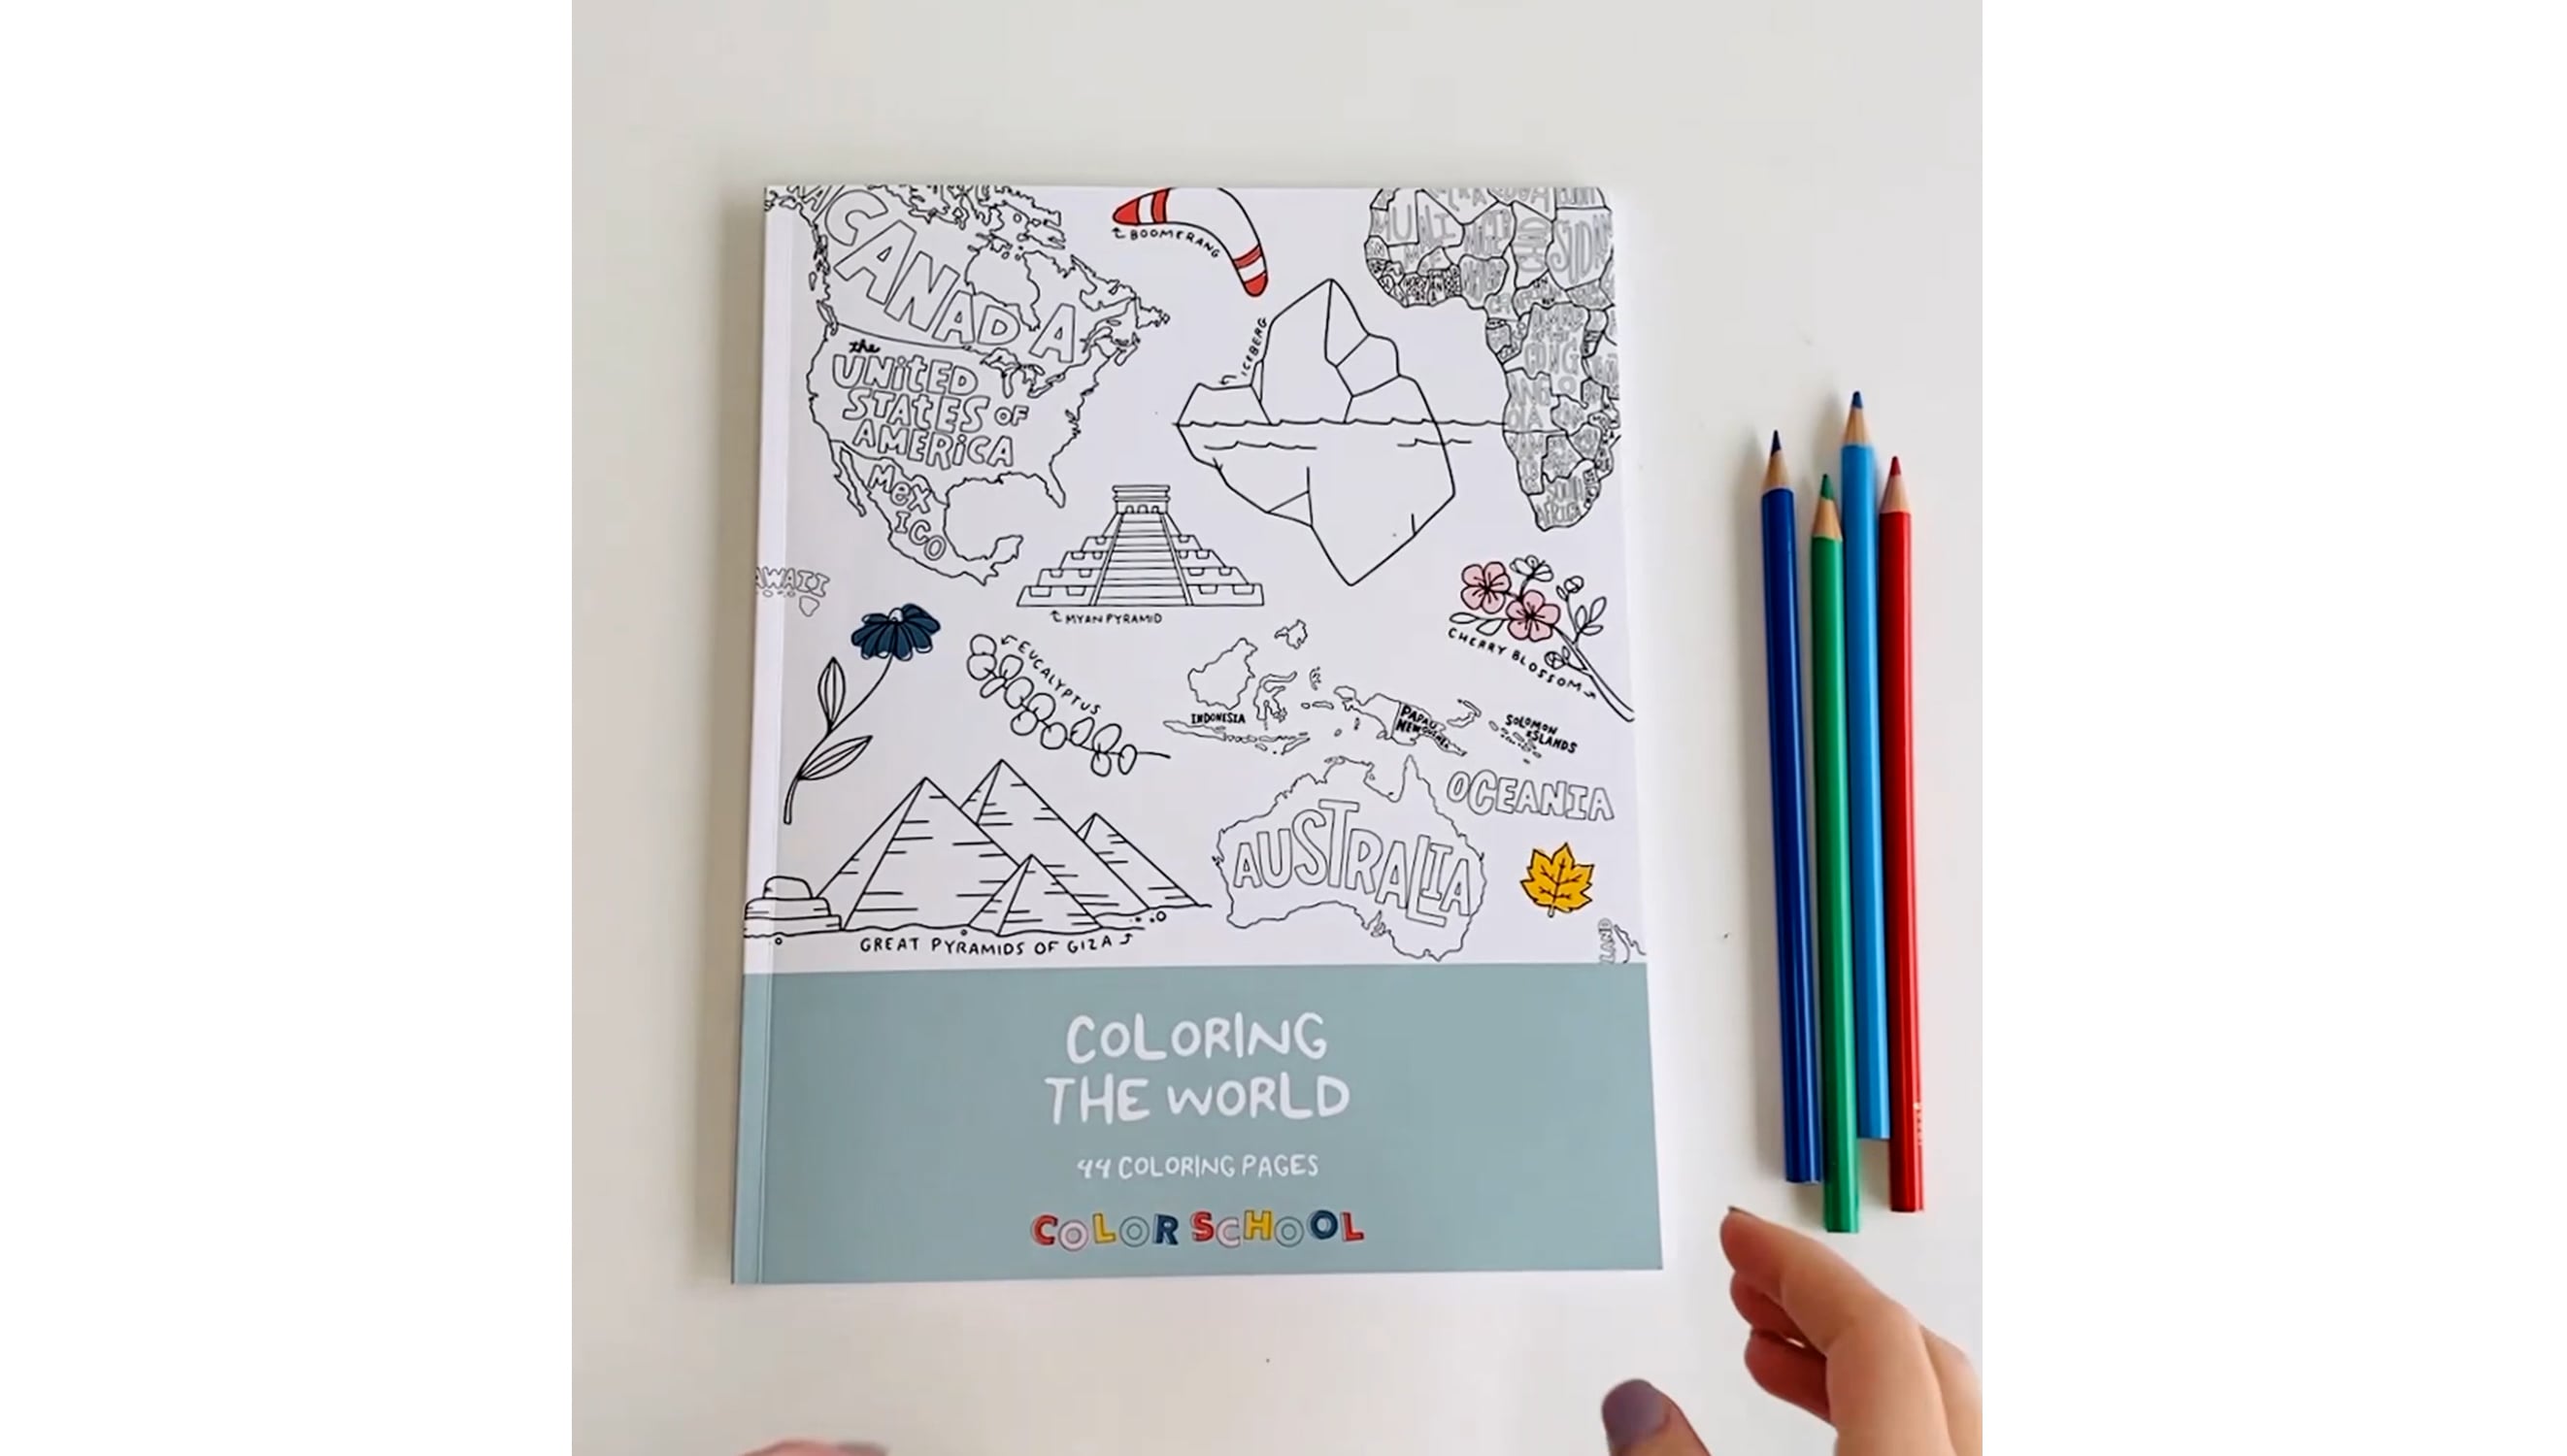 Coloring Book - Coloring The World video